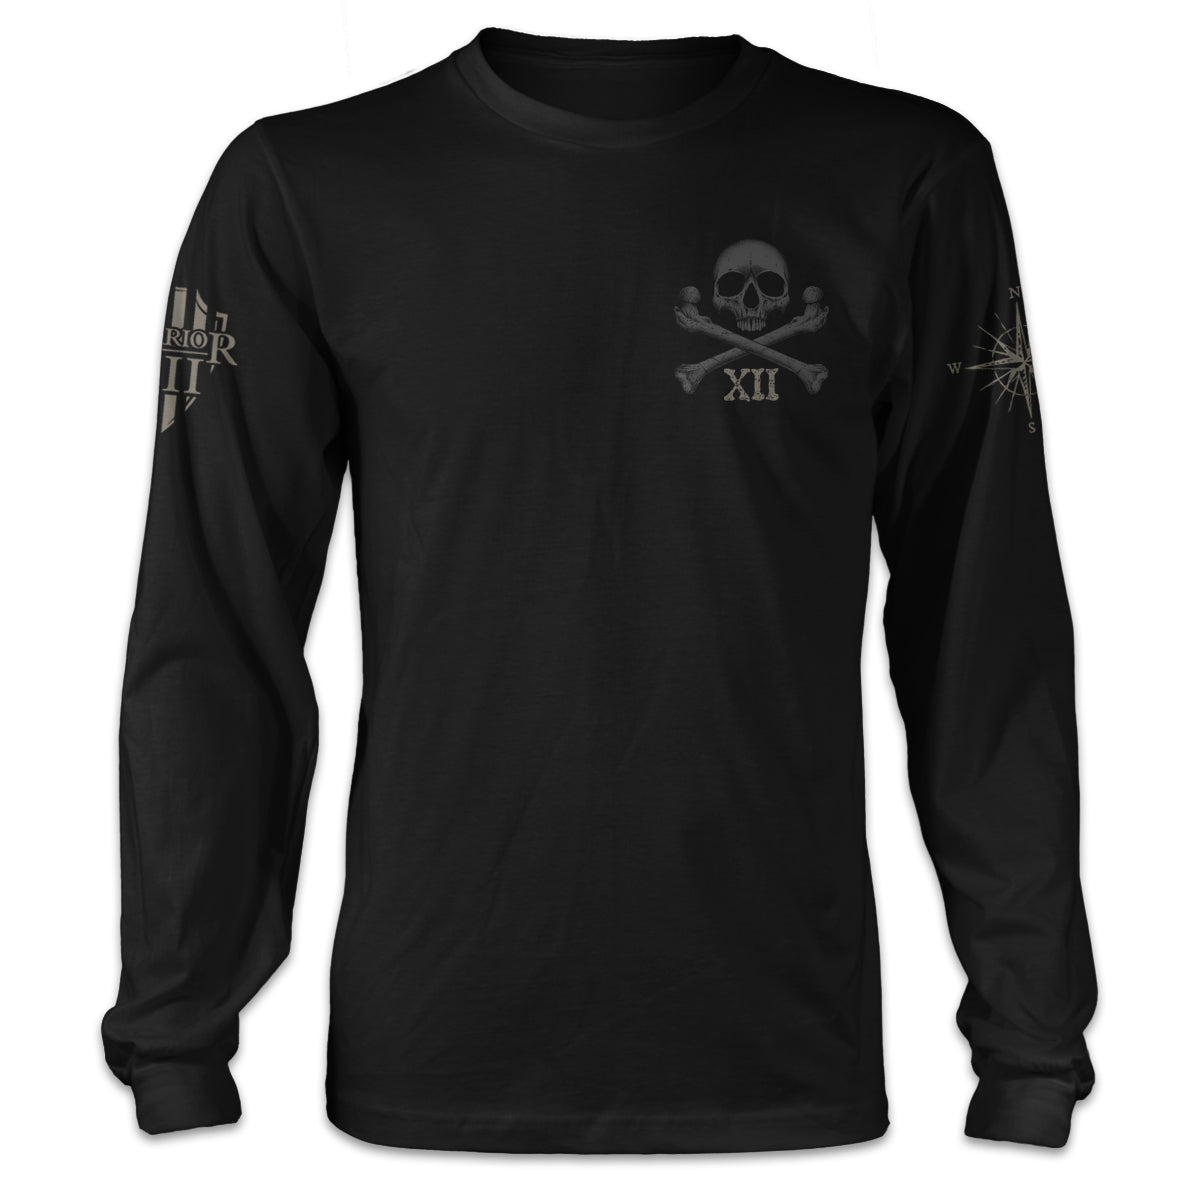 A black long sleeve shirt with skull and crossbones with roman numerals XII printed on the front.